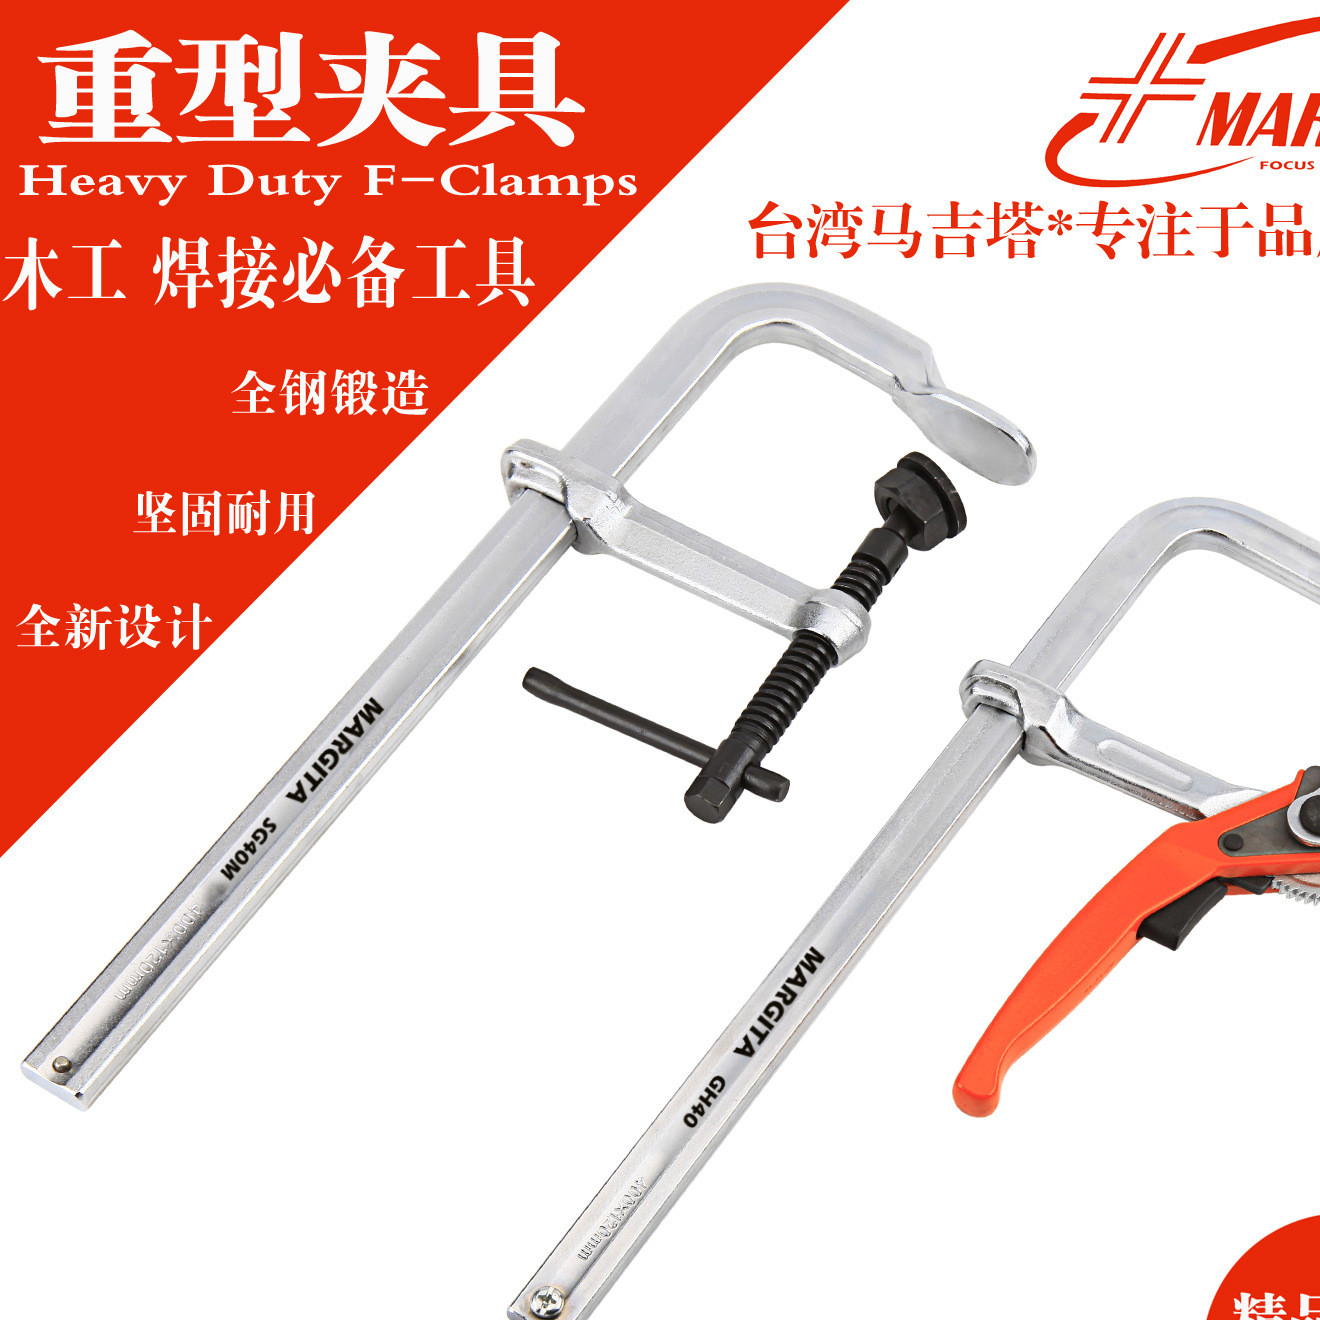 Taiwan FECOM fast clamping clamp woodworking clamp welding fixture original quality warranty for one year